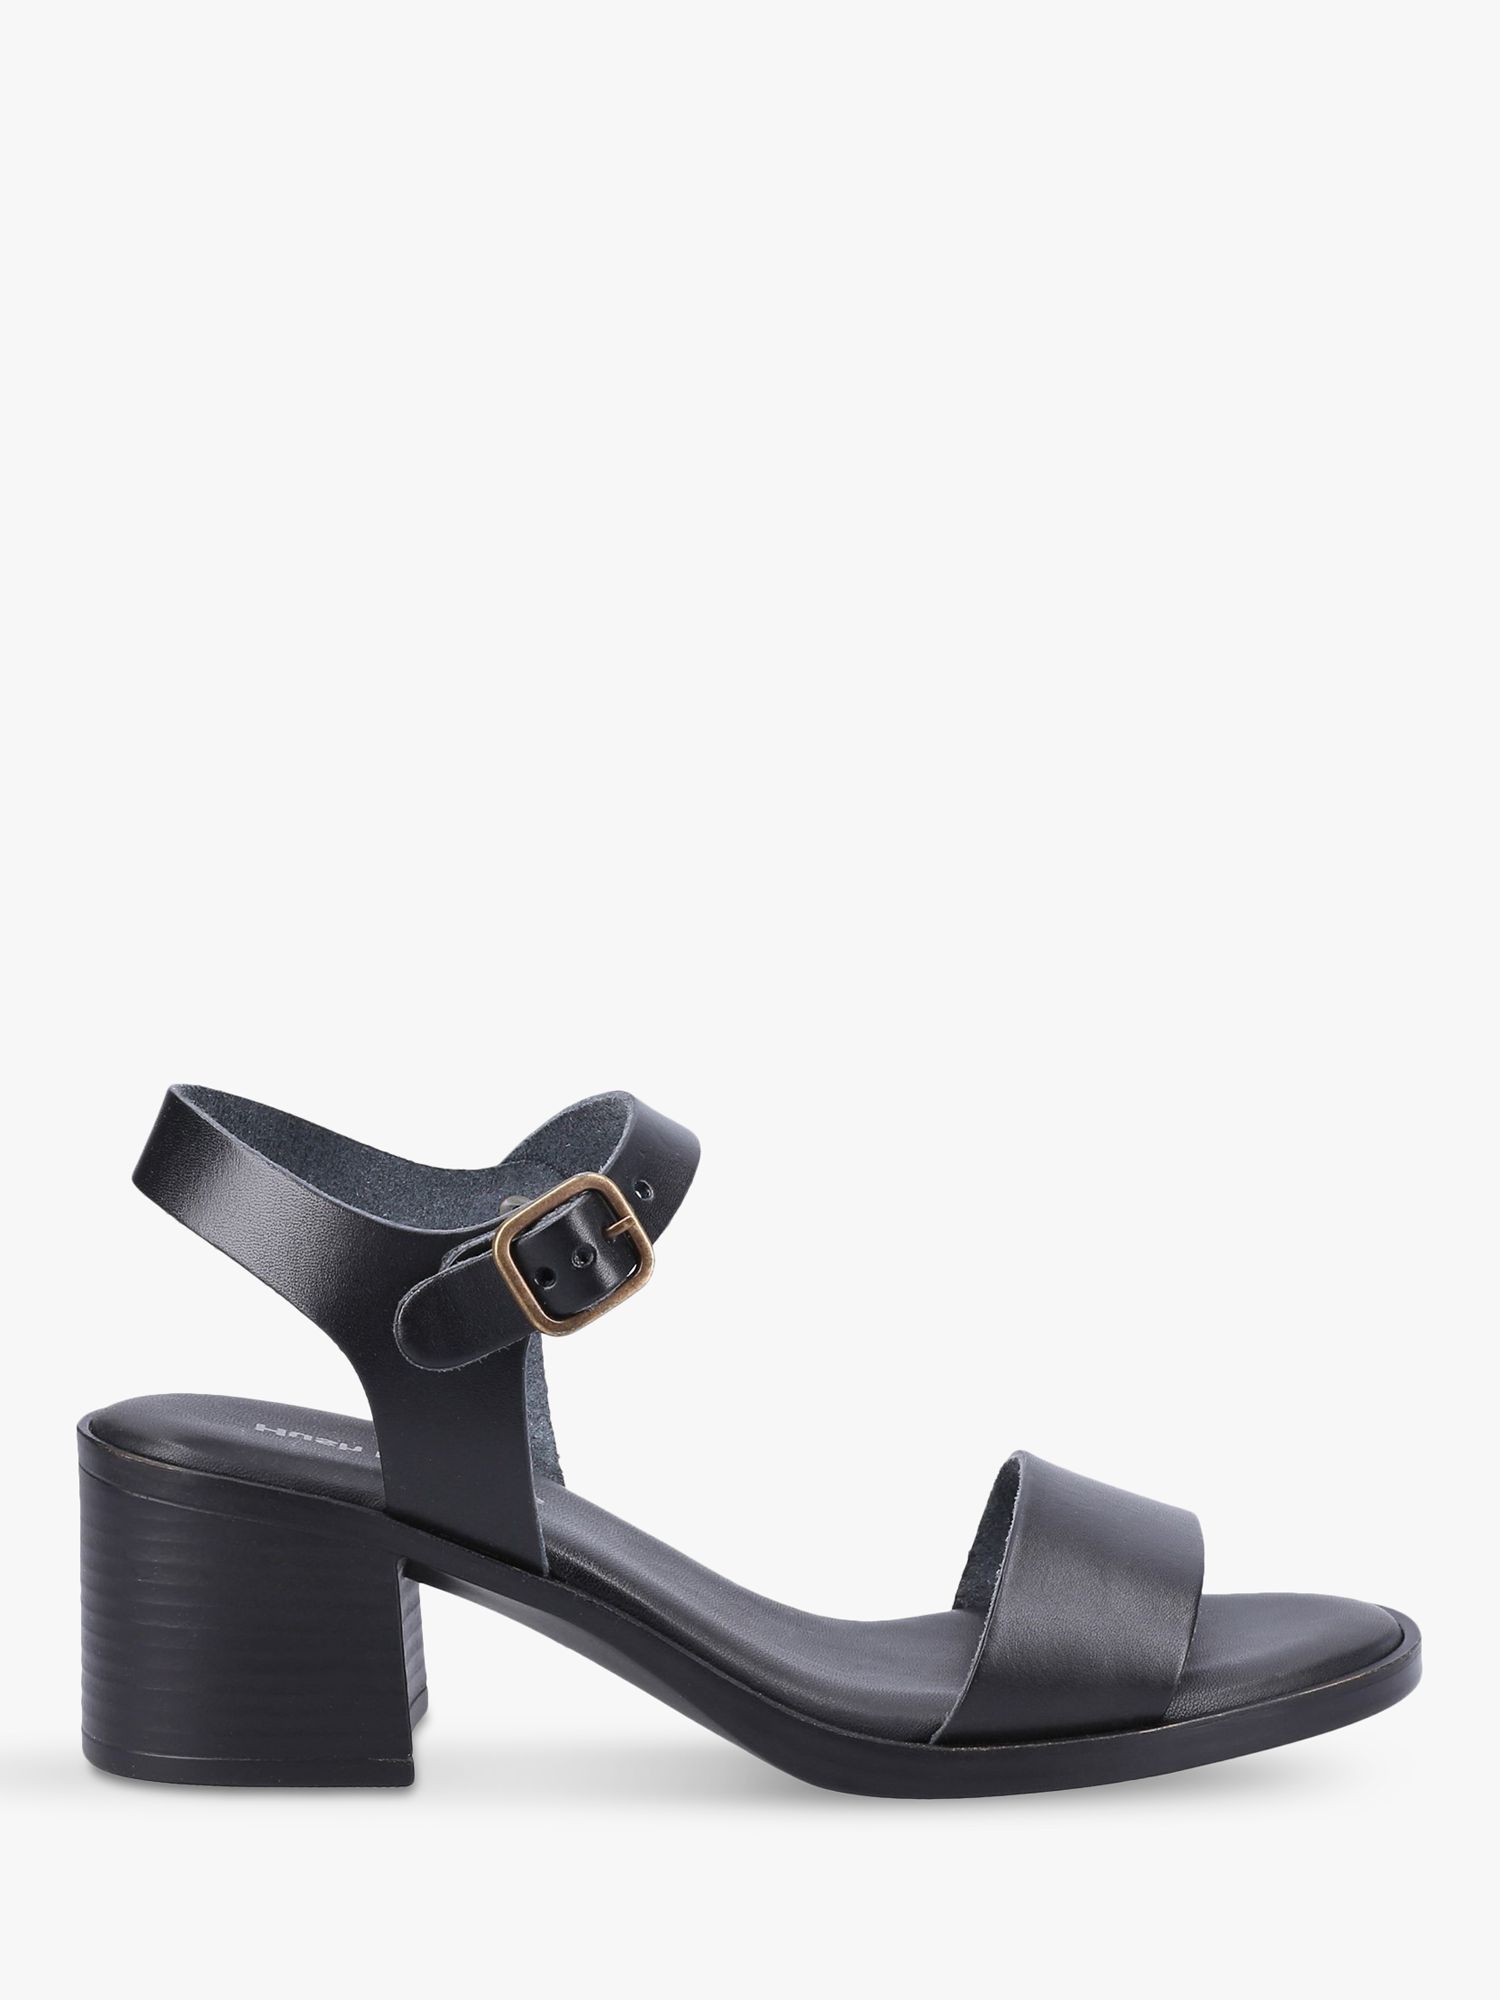 Hush Puppies Gabby Two Part Buckle Sandal, Black at John Lewis & Partners